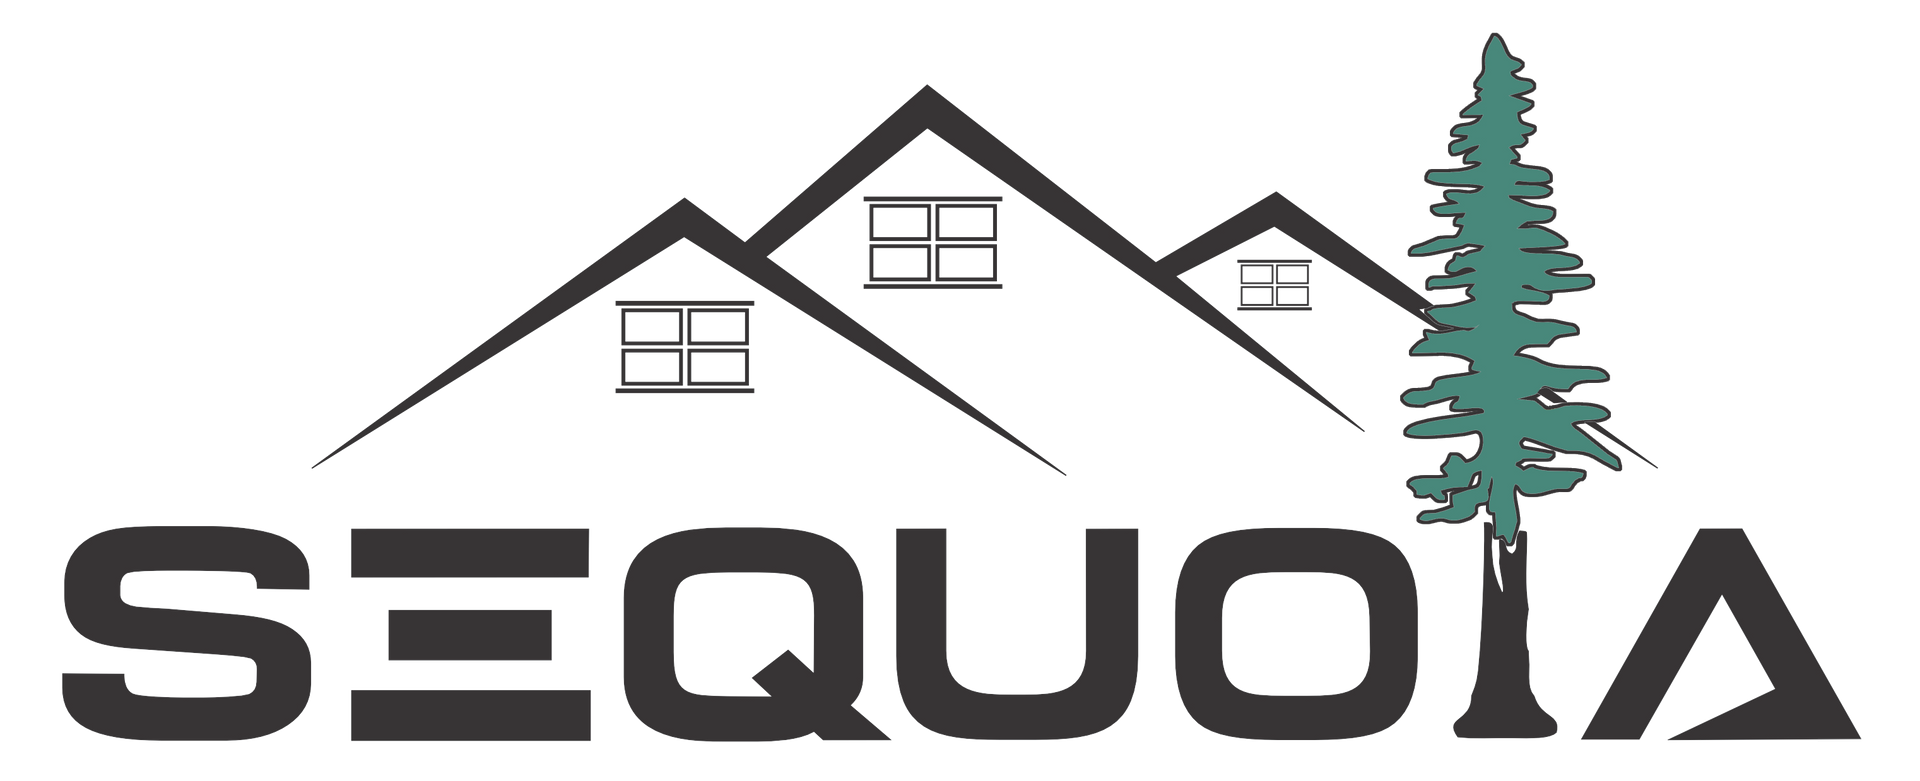 Sequoia Roofing & Construction Logo